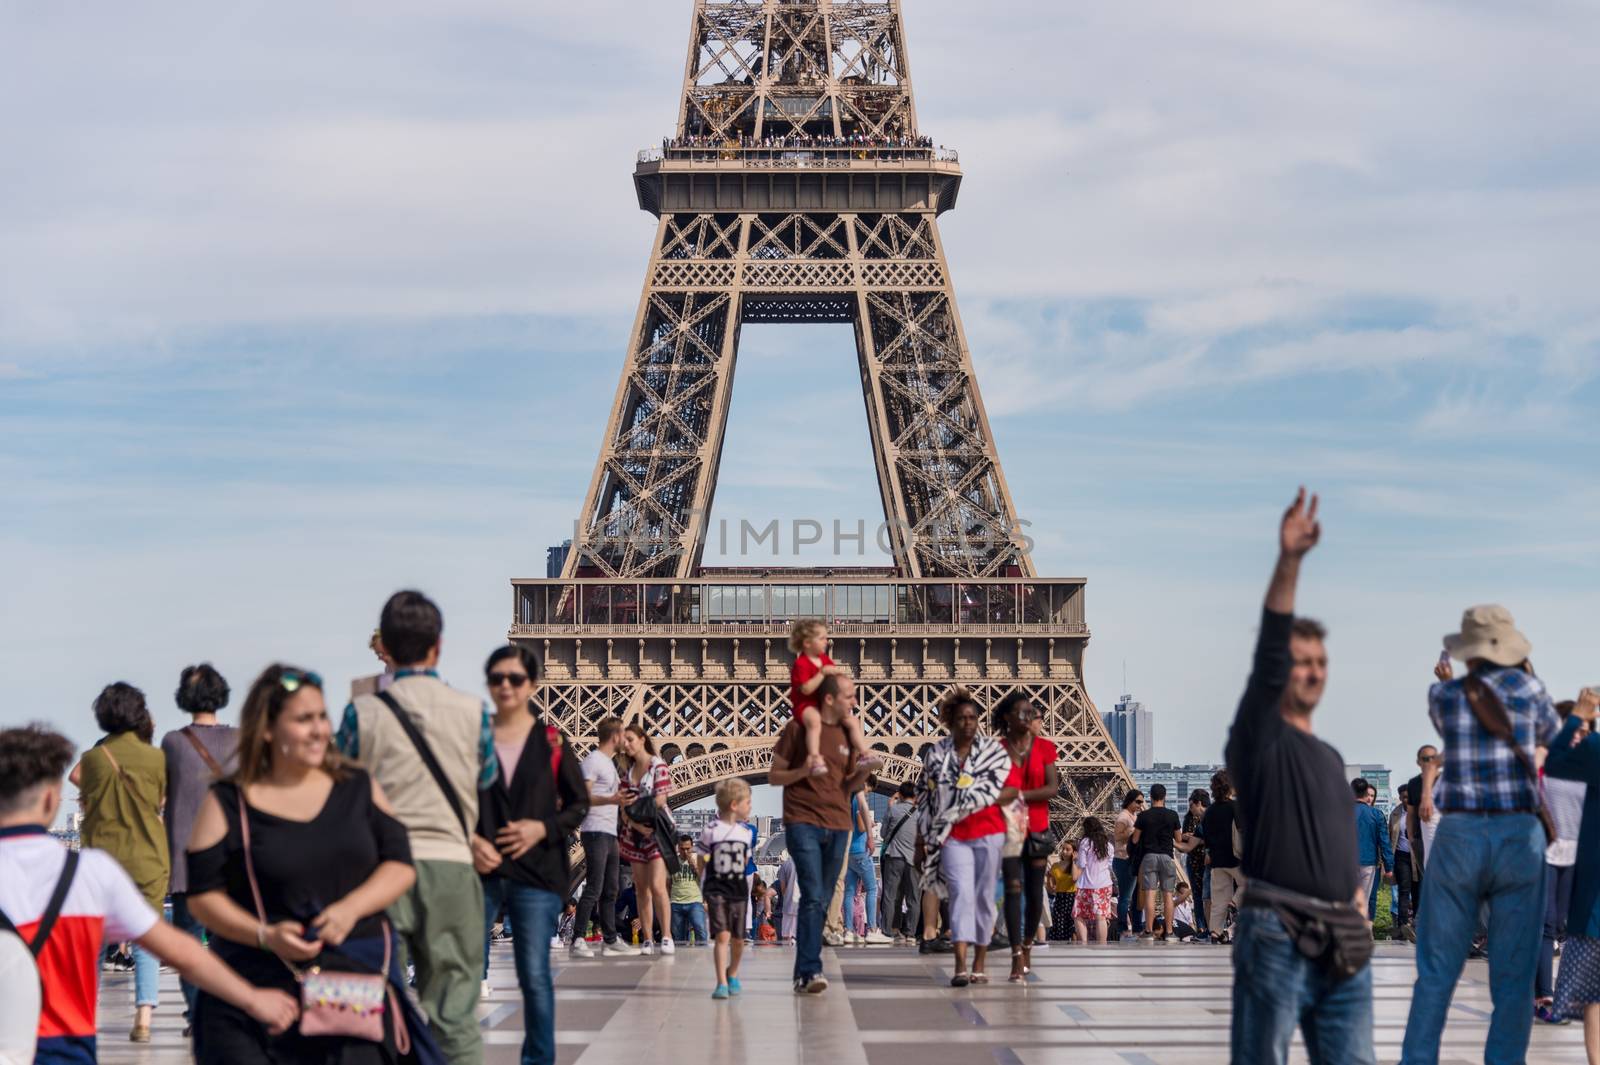 Paris, France - 23 June 2018: Eiffel Tower from Trocadero with many tourists in the foreground